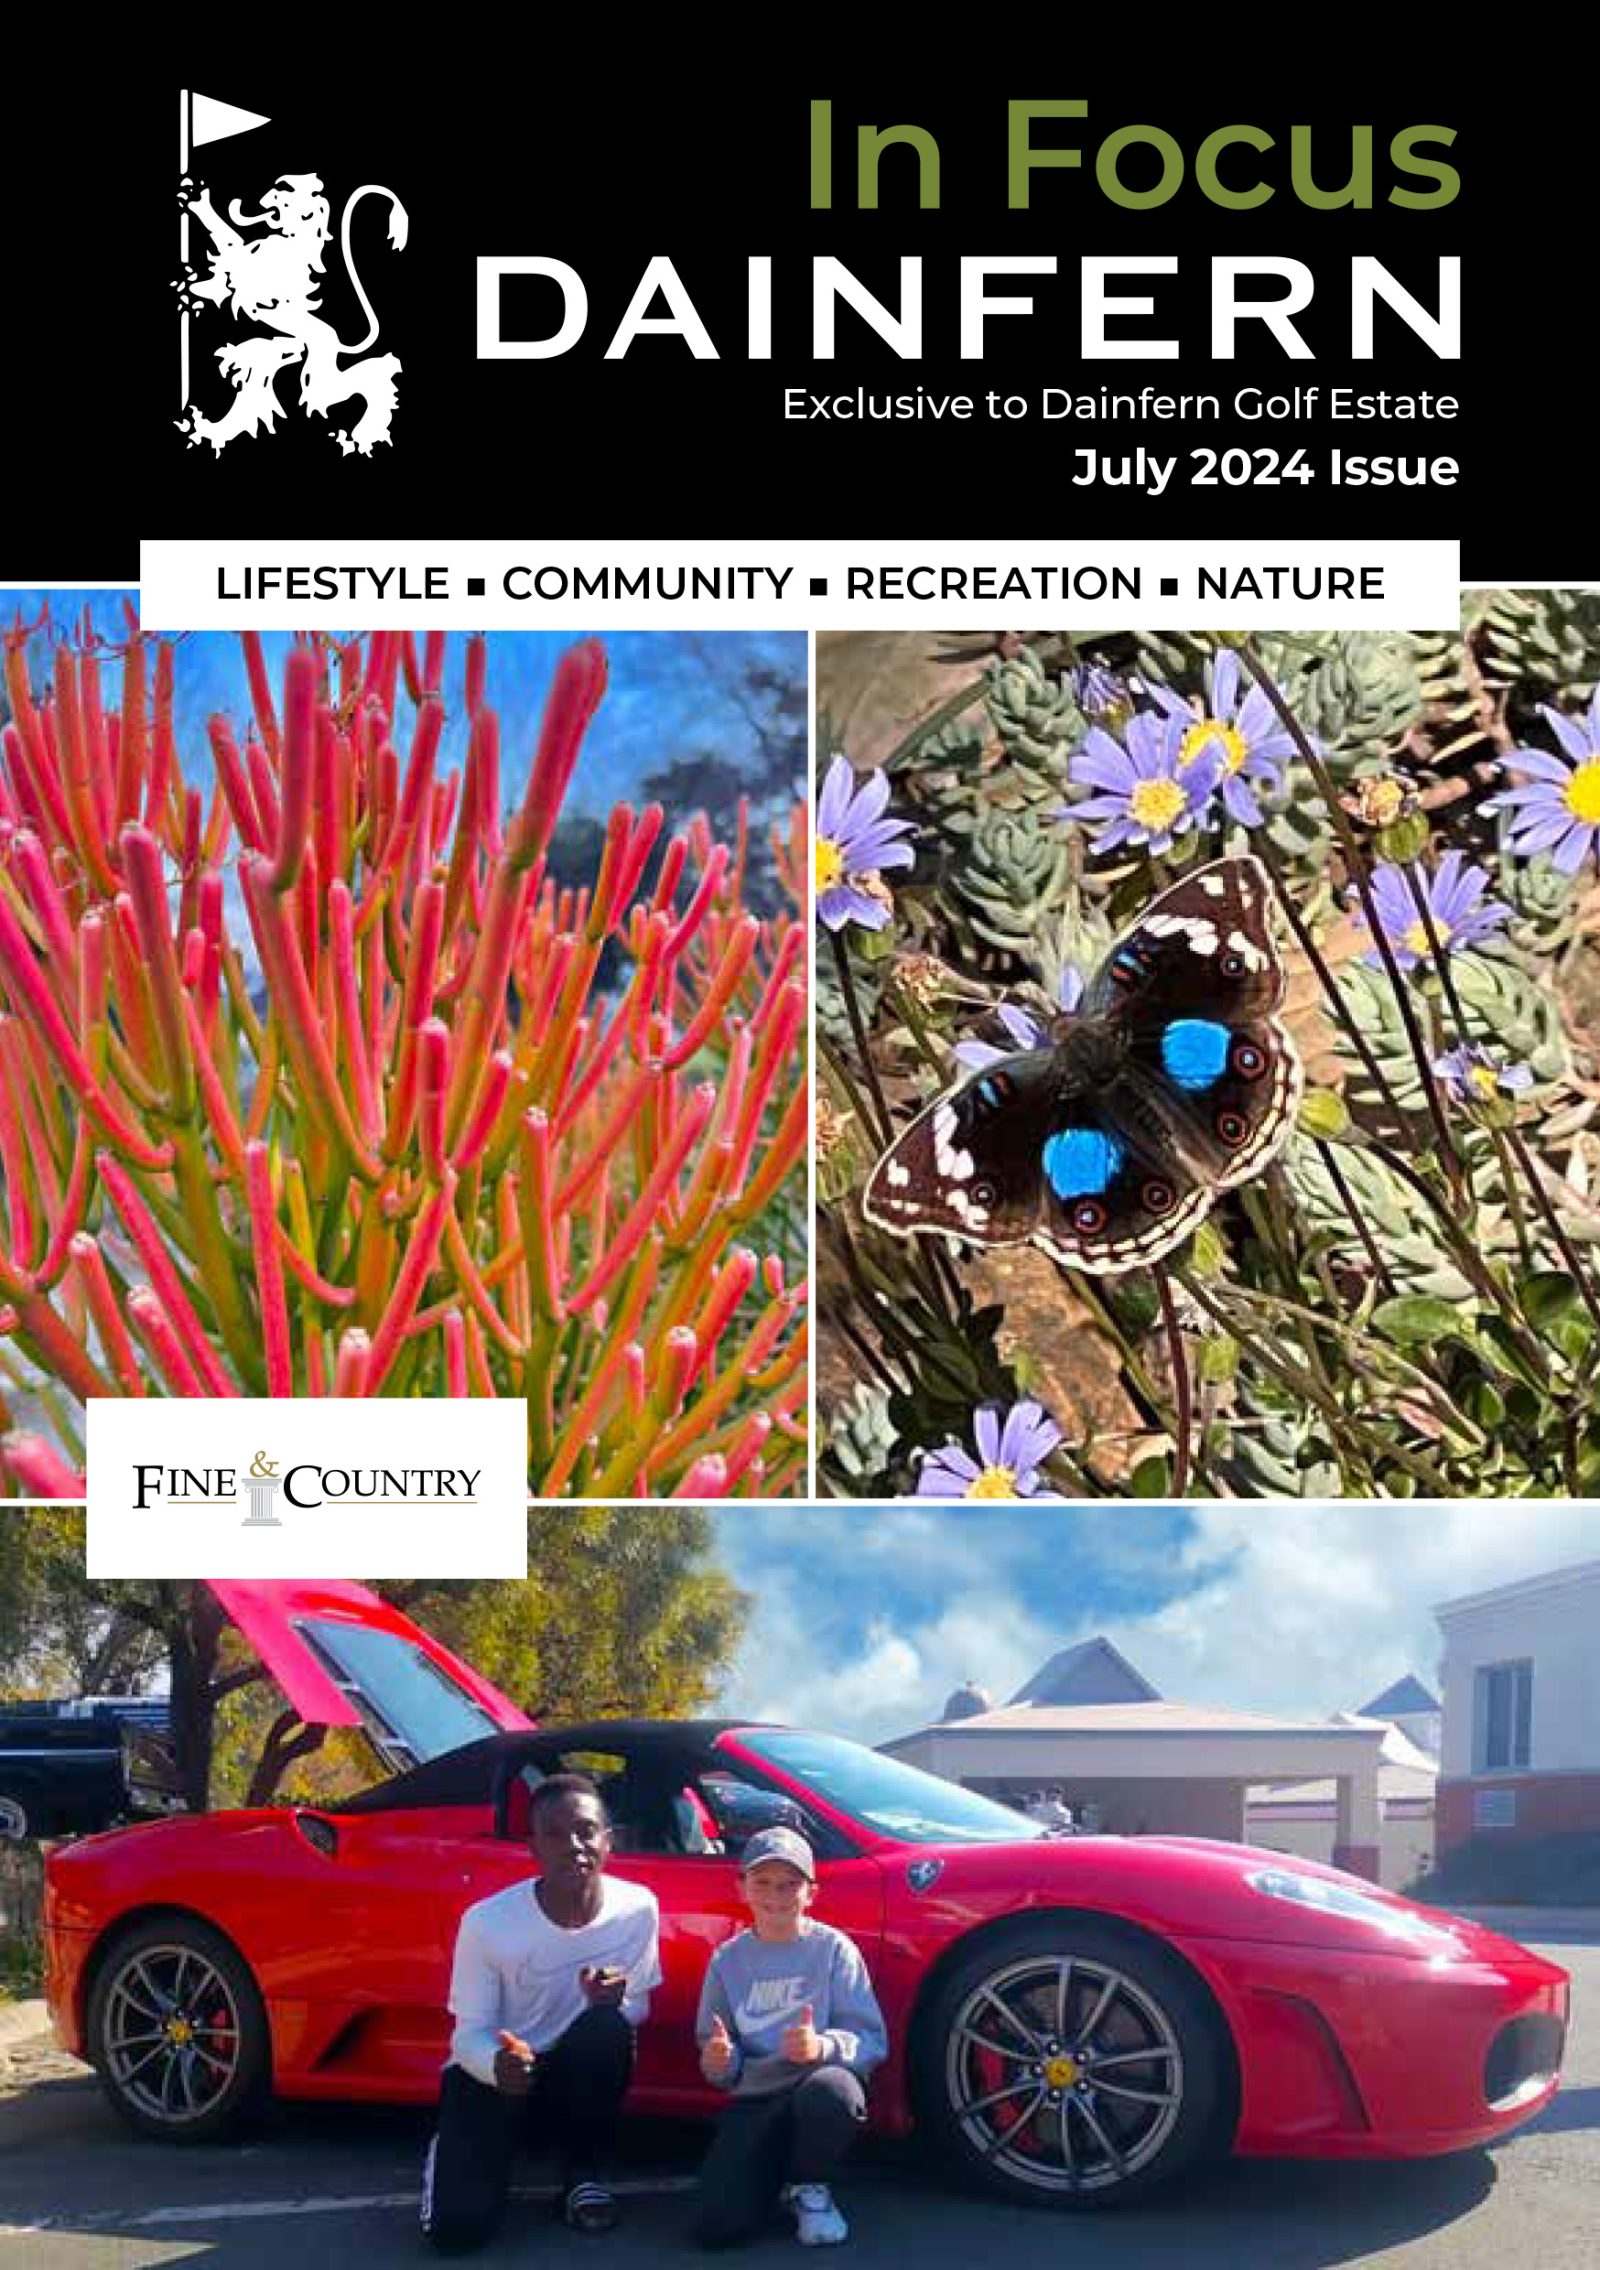 In Focus your community magazine – Dainfern Nature Association July 2024